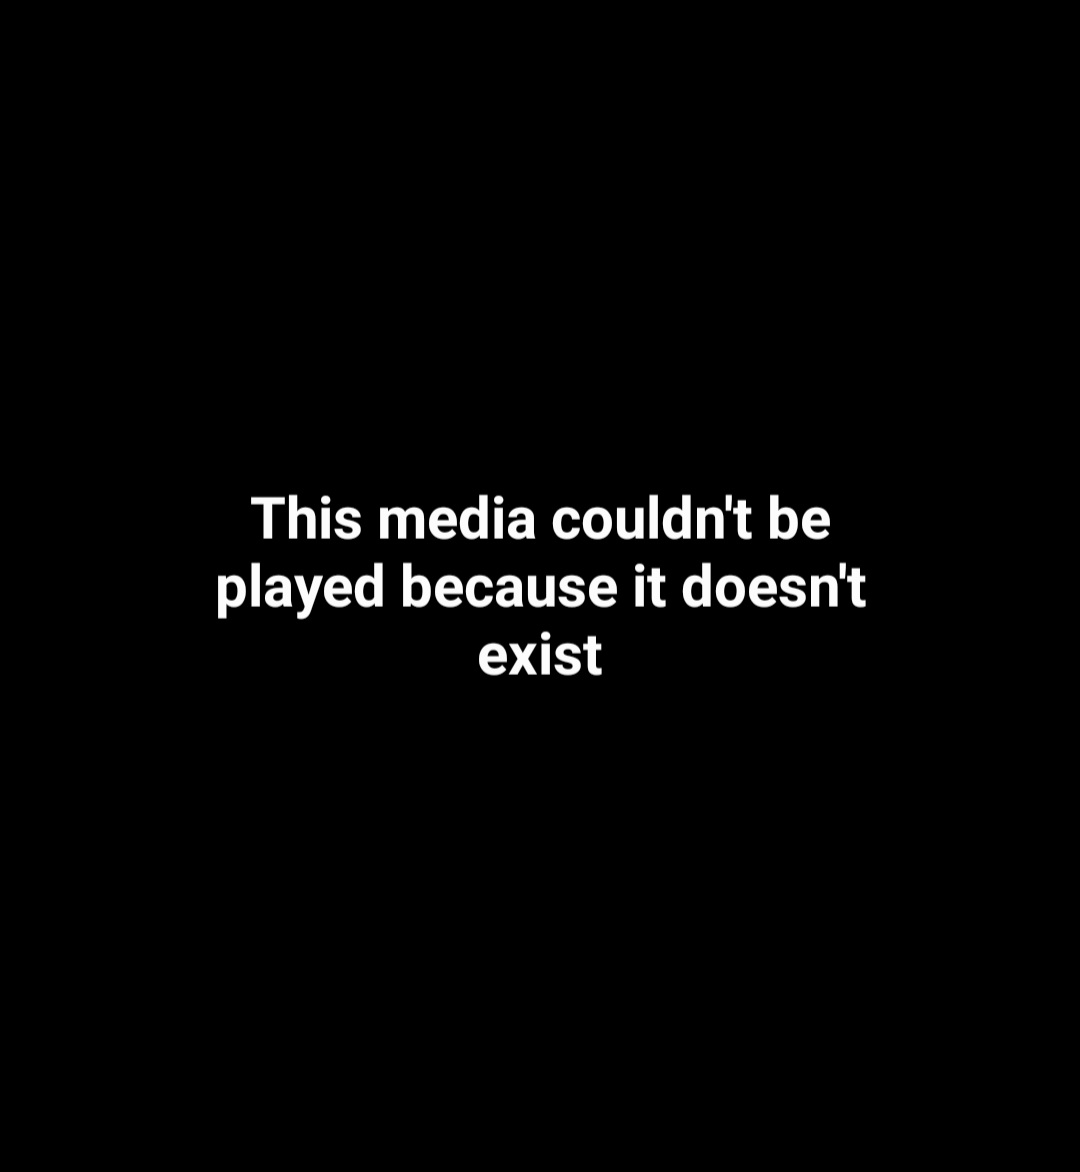 Crystal Palace vs Fulham first half highlights

#CRYFUL